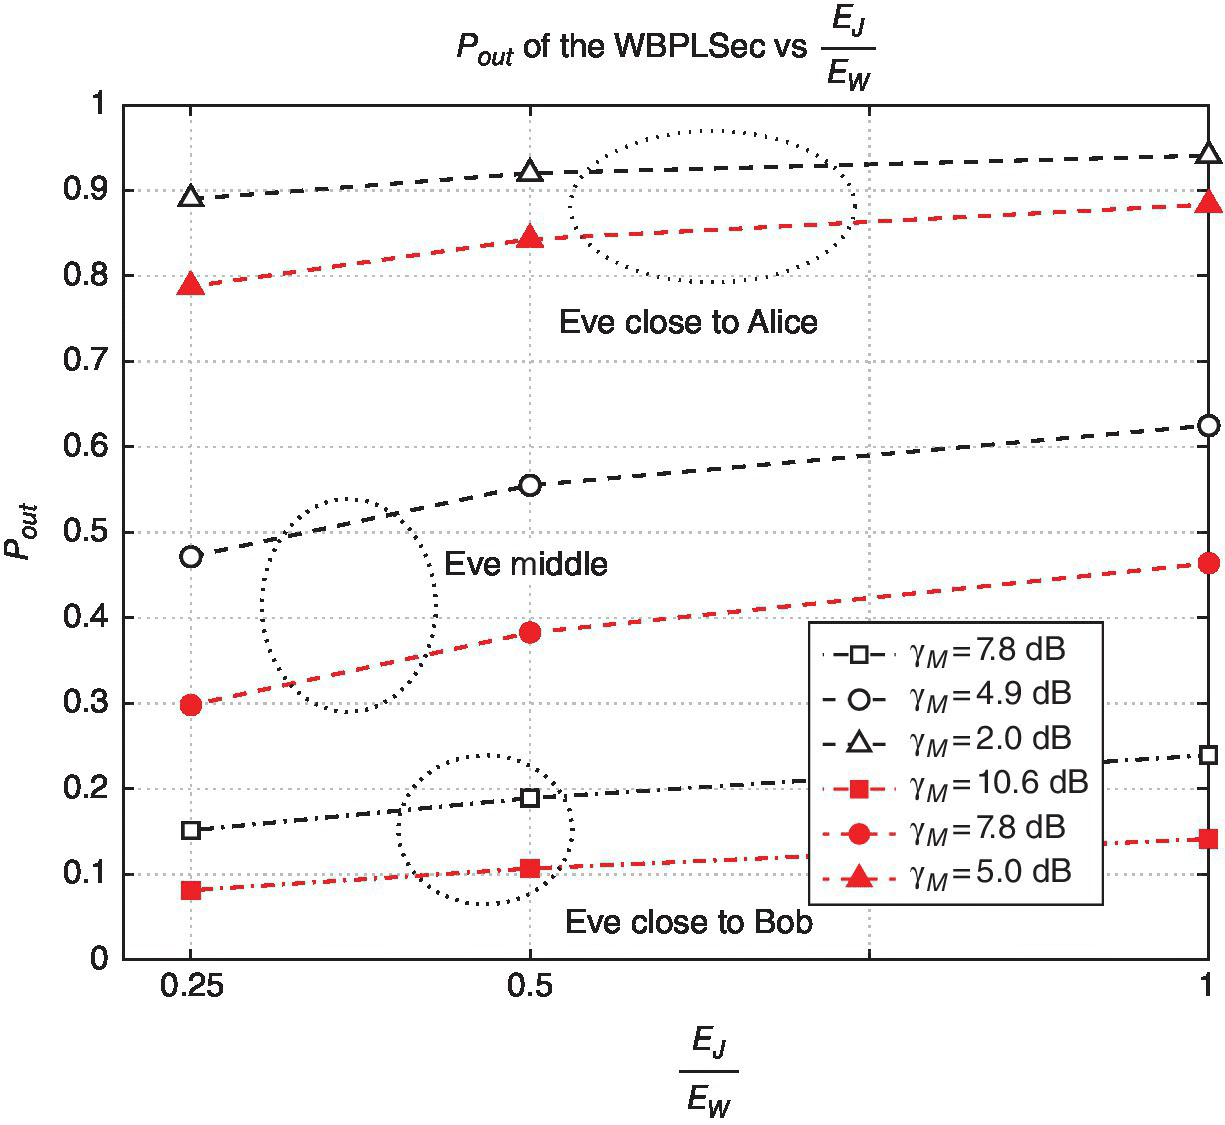 Graph of EJ/ EW vs. Pout with 6 ascending lines with markers corresponding to γM of 7.8, 4.9 dB, 2.0 dB, 10.6 dB, 7.8 dB, and 5.0 dB. 3 Ellipses depict 3 positions: Eve close to Alice, Eve middle, and Eve close to Bob.